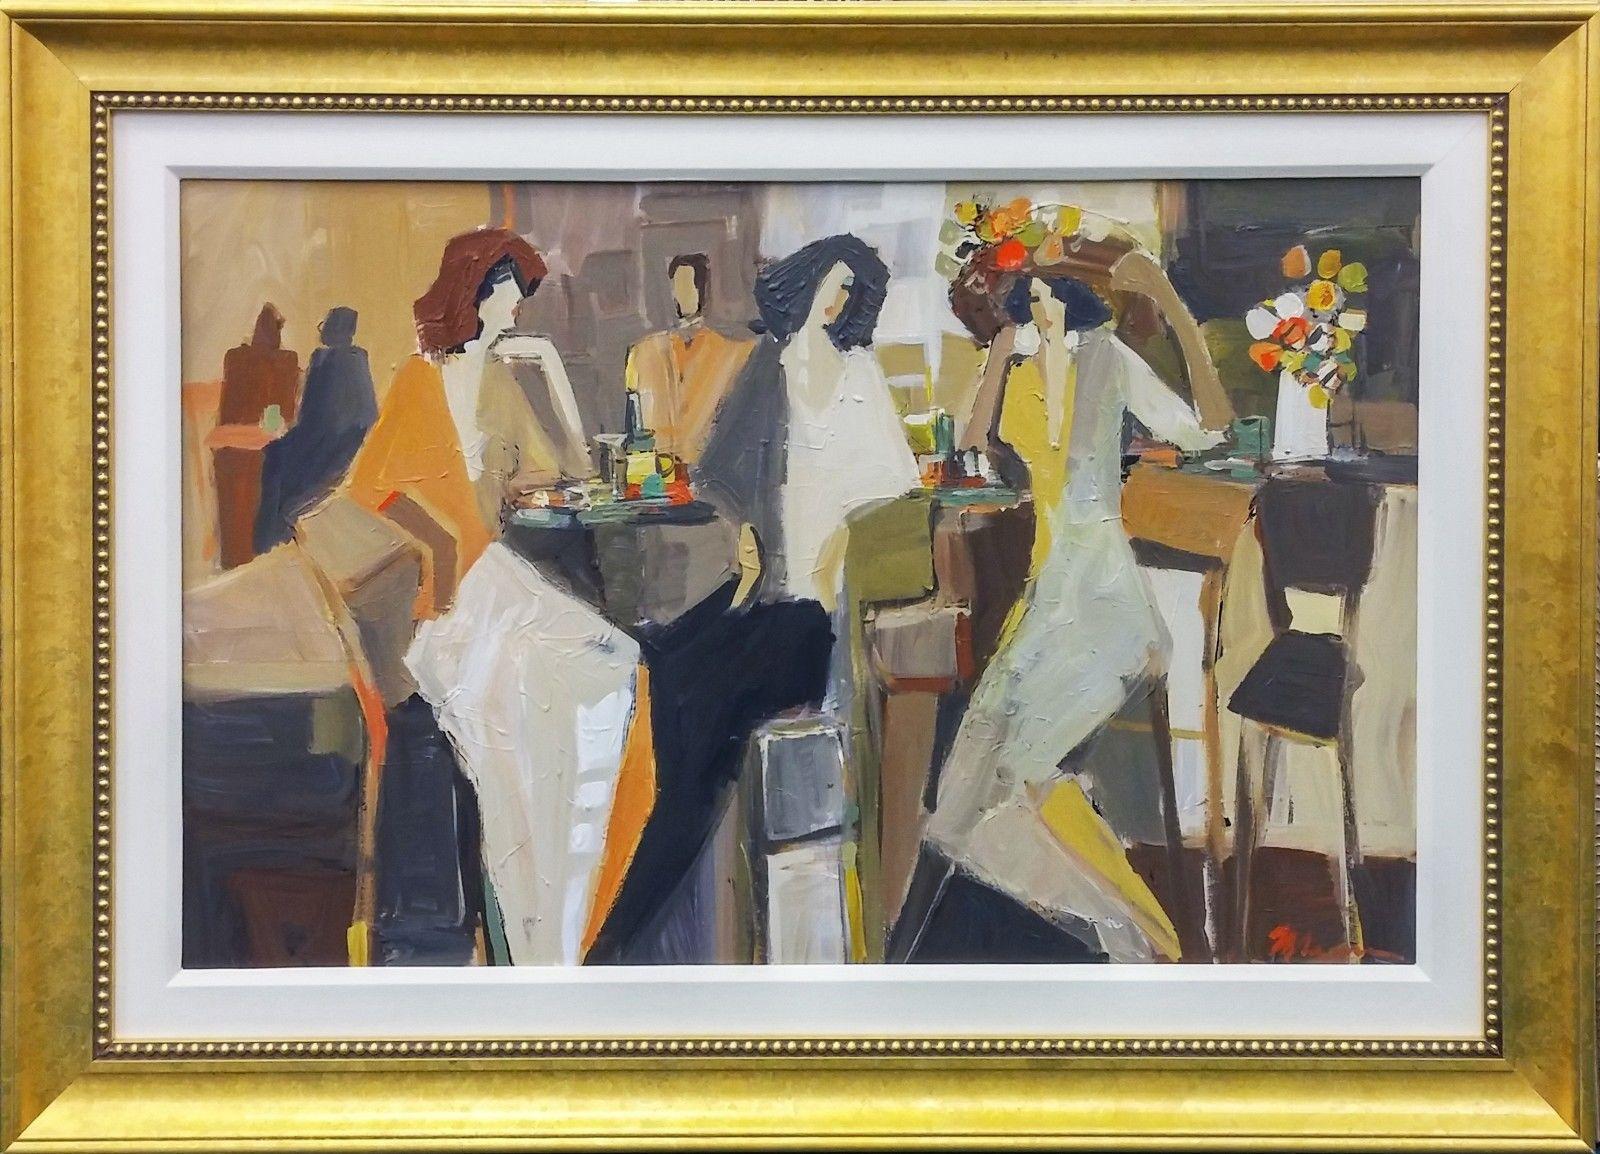 L'ILLUSION - Painting by Isaac Maimon